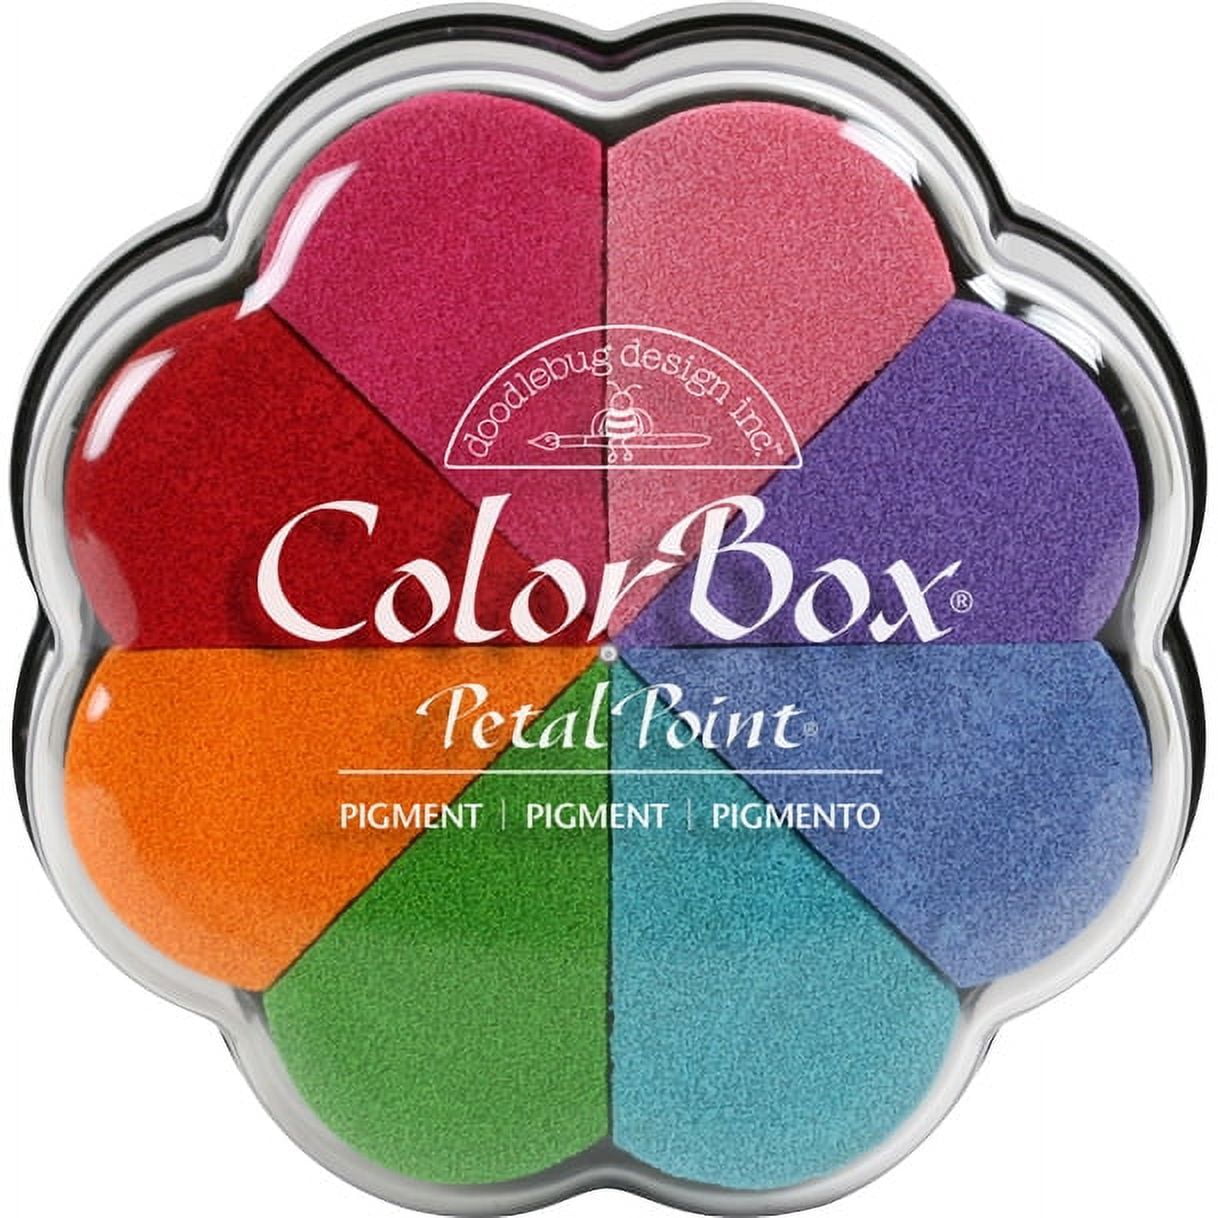 Buy CLEARSNAP ColorBox Cleaning Pad Inkpad Online at